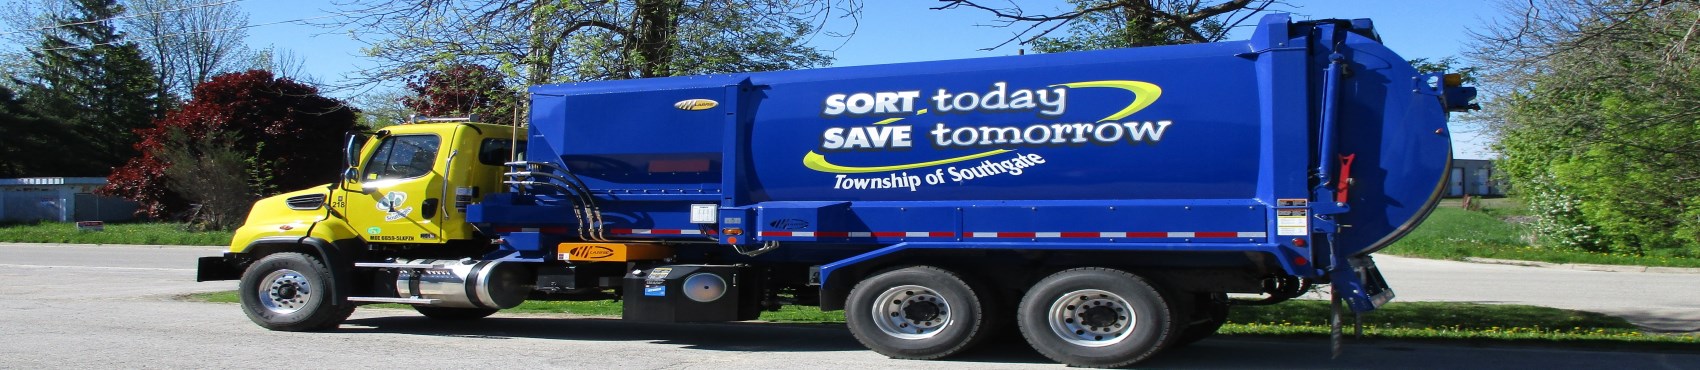 Southgate Recycle and Waste Collection Truck